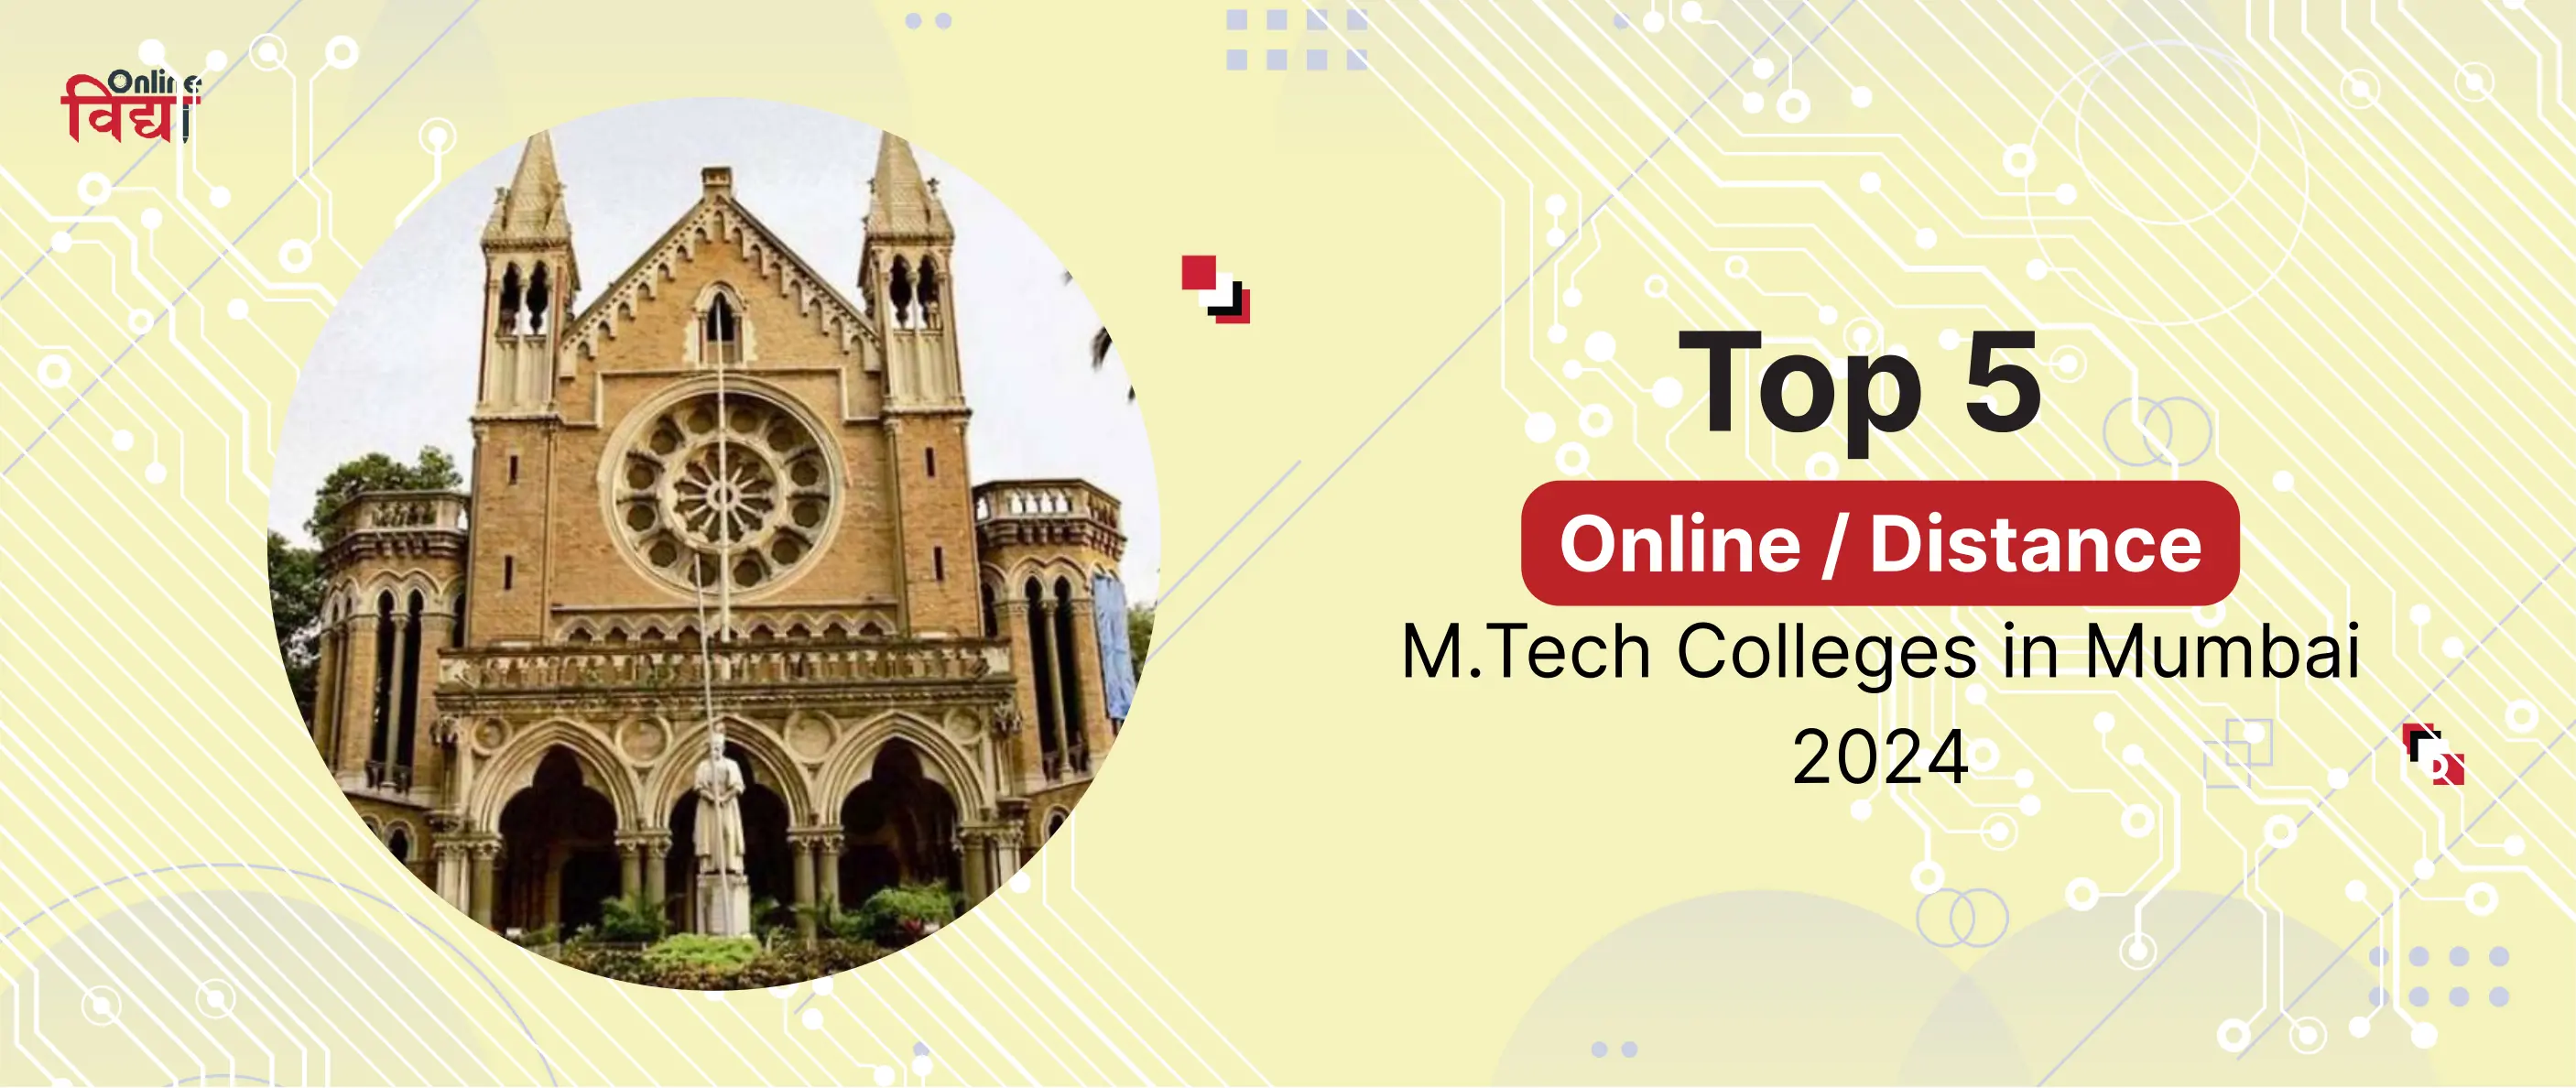 Top 5 Online/Distance M.Tech Colleges in Mumbai 2024